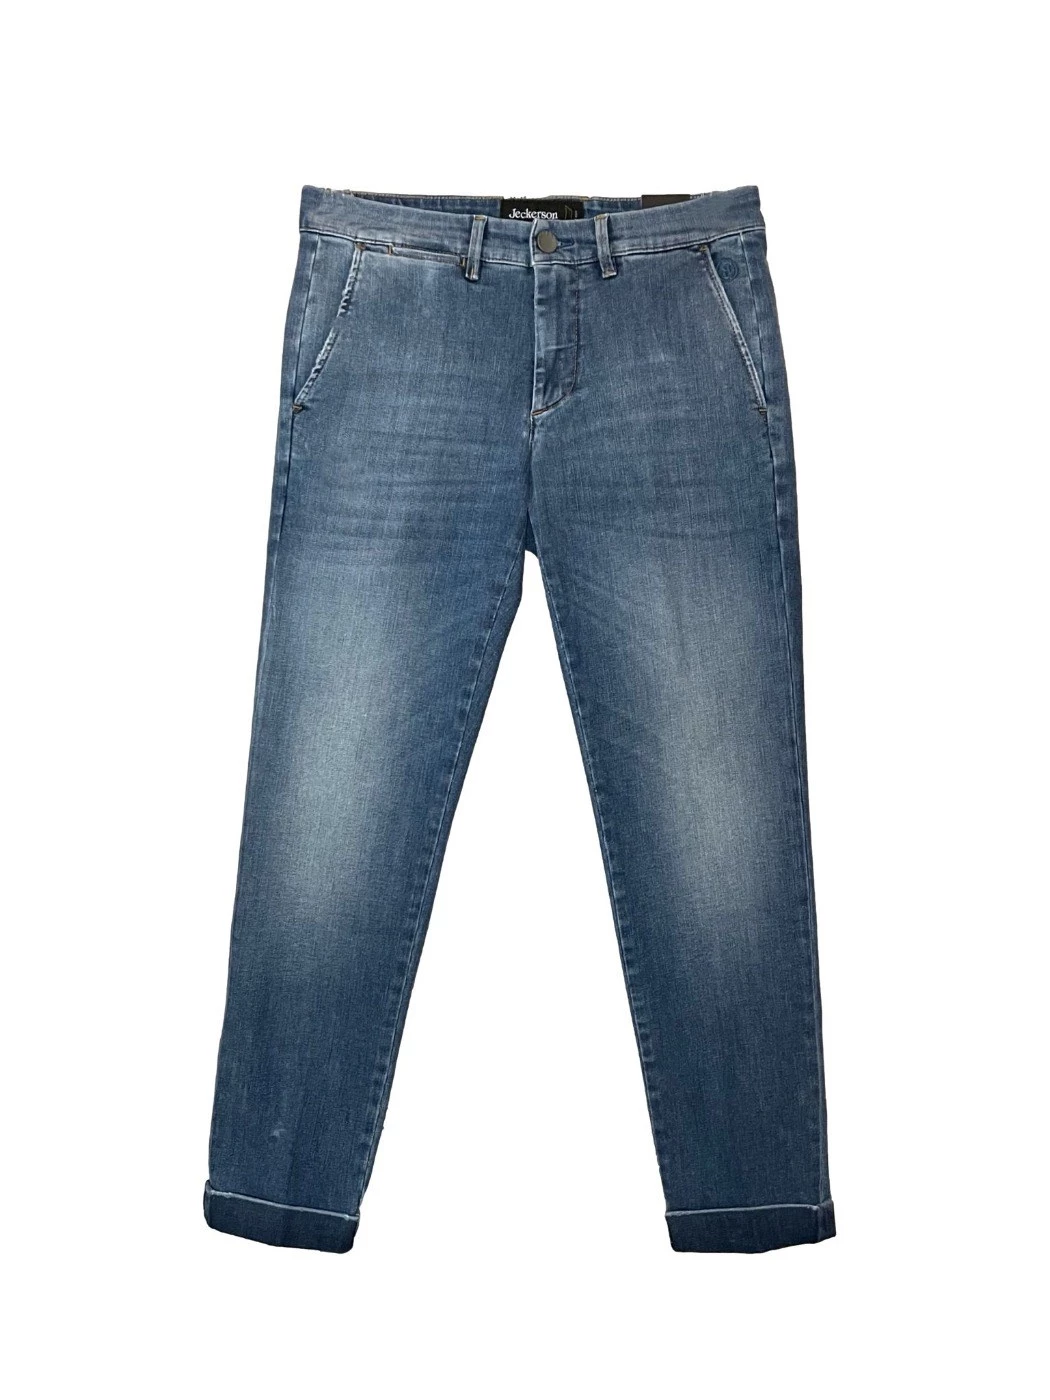 Slim chino ankle jeans